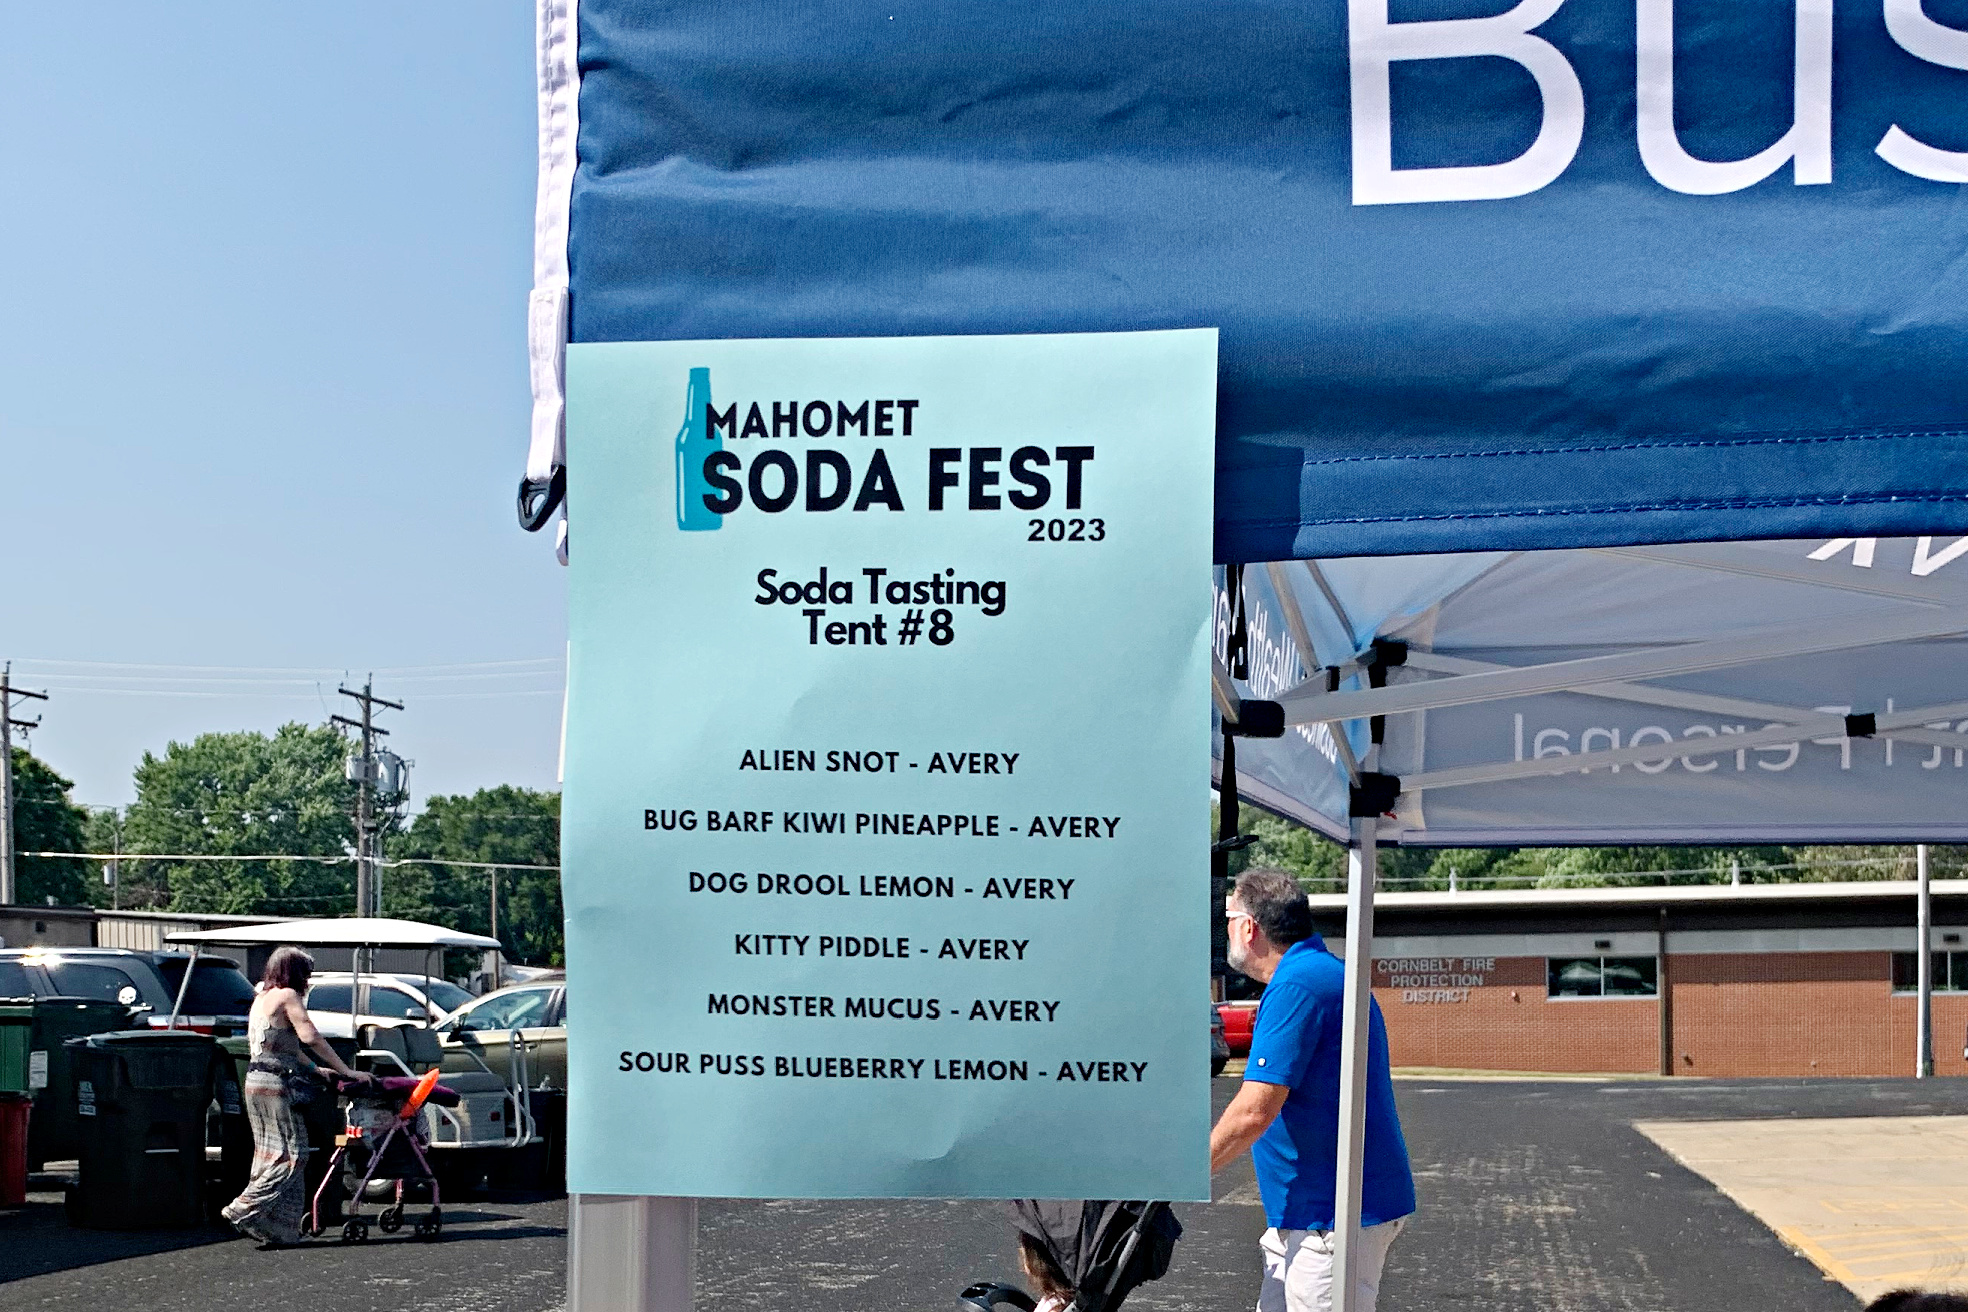 The 3rd Annual Mahomet Soda Fest A Refreshing Summer Adventure Just